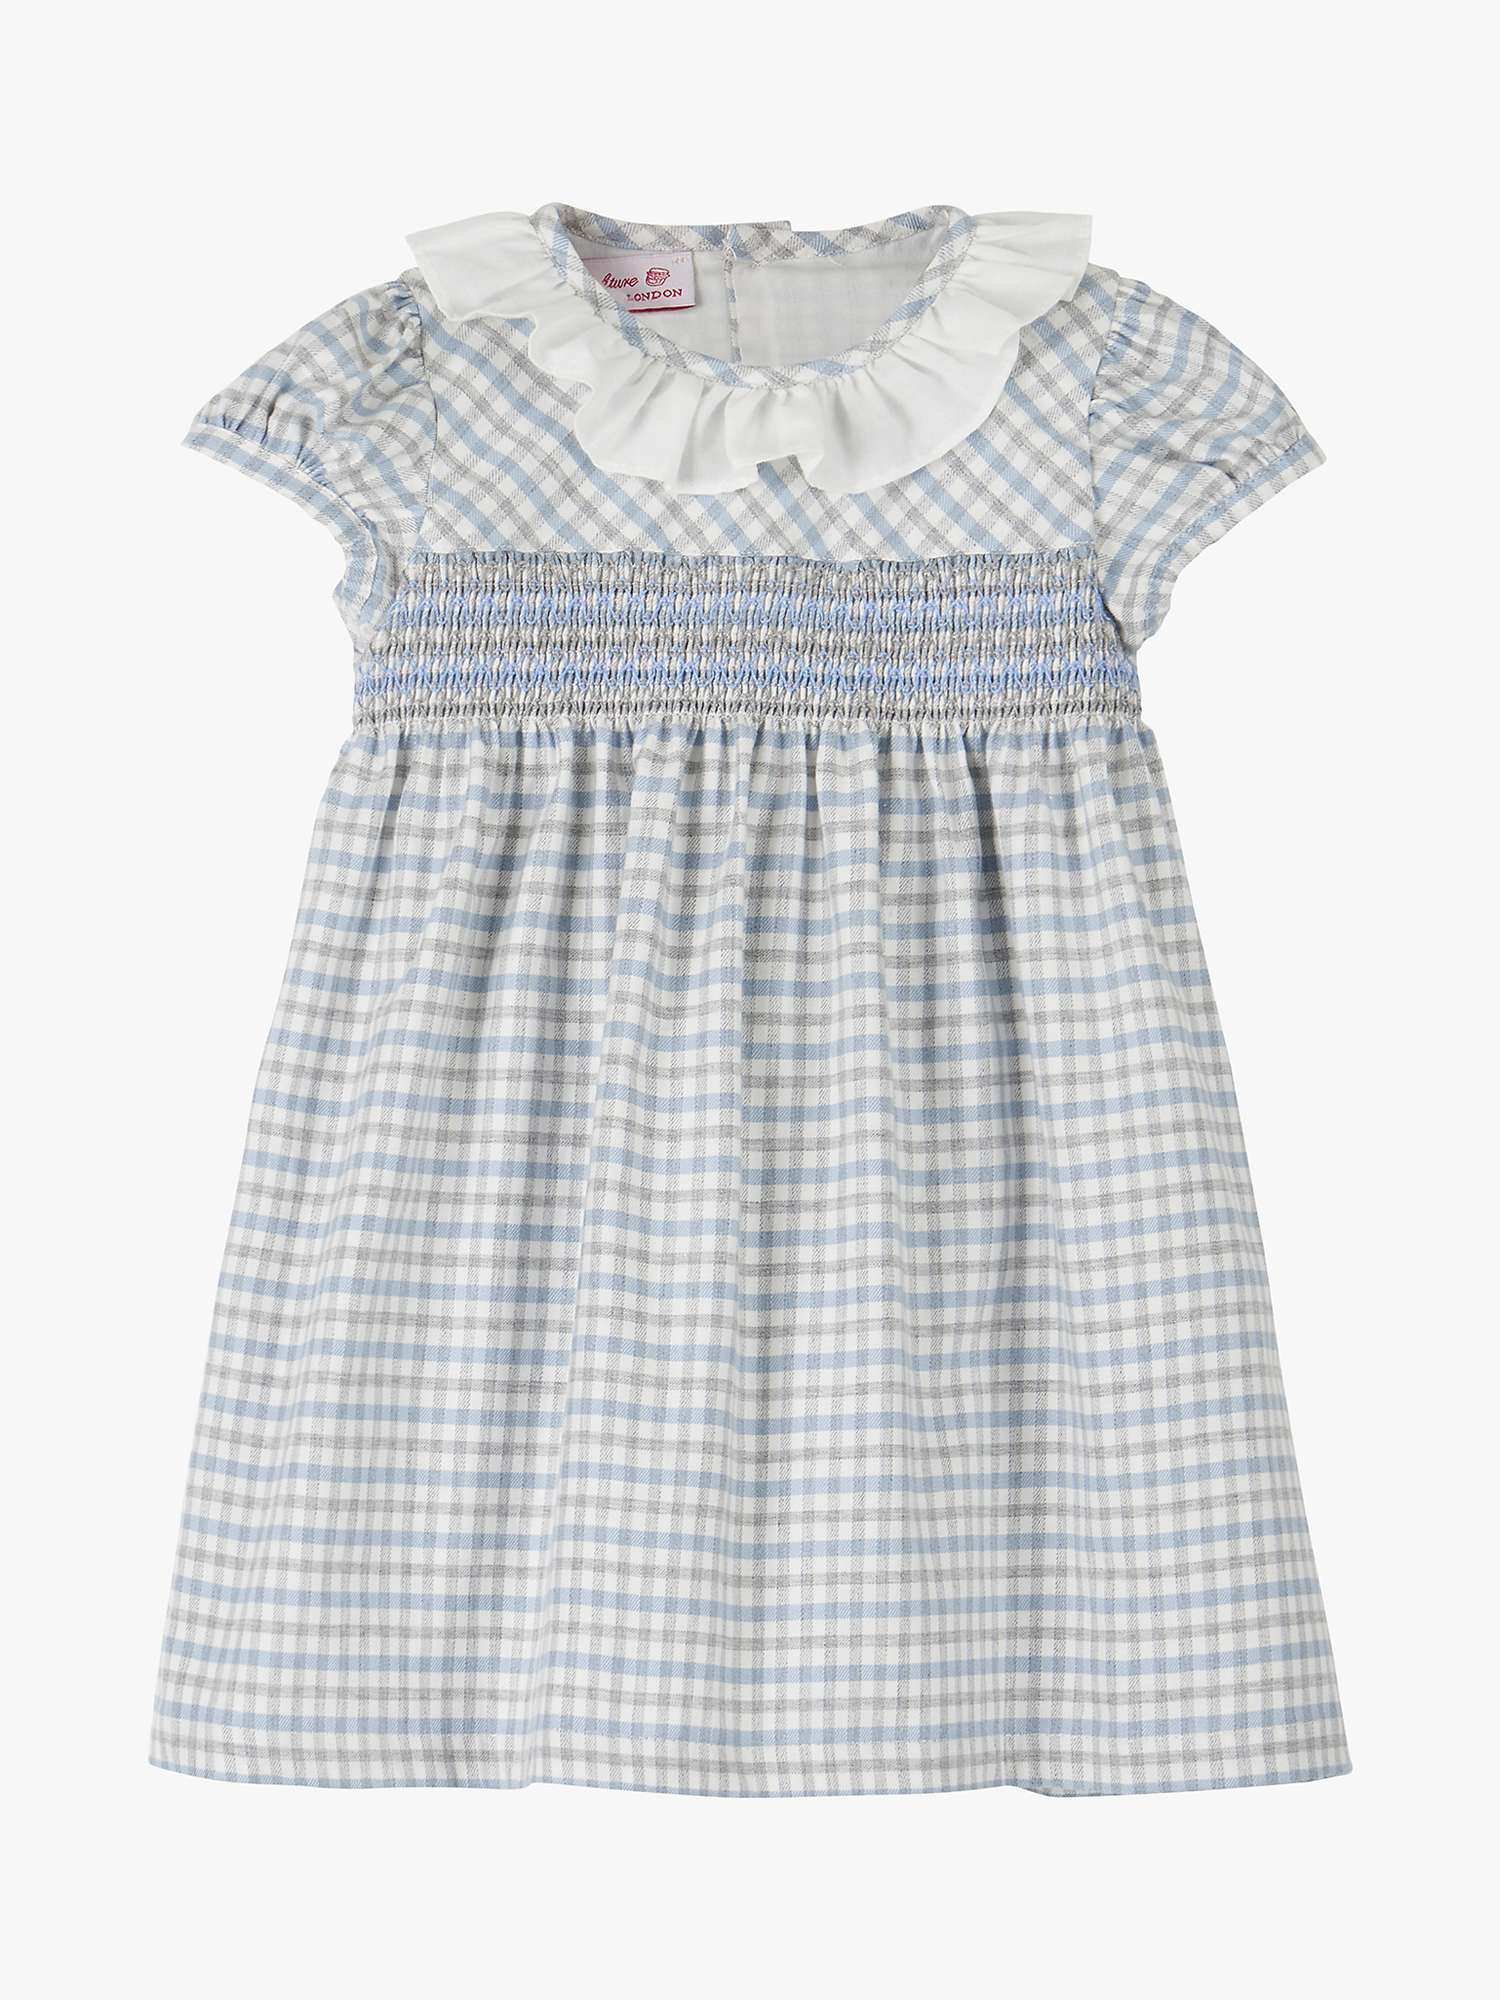 Buy Trotters Baby Agatha Check Print Willow Collar Smocked Dress Online at johnlewis.com